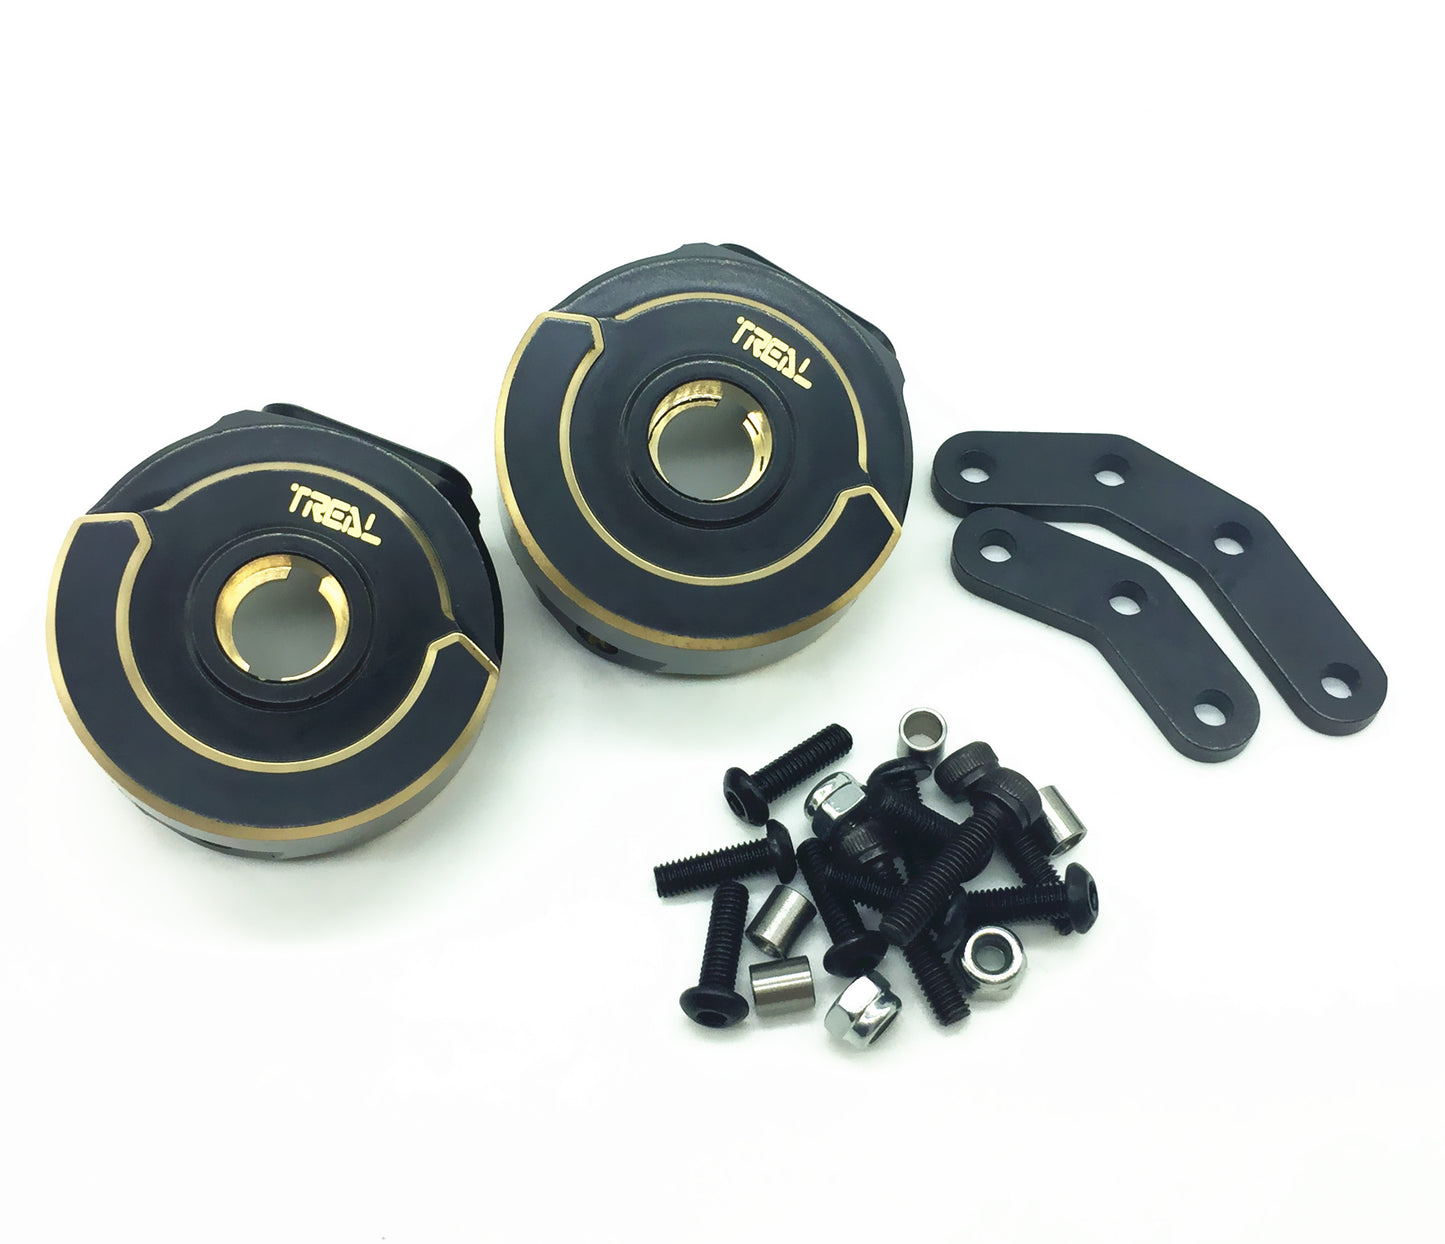 Treal Brass Front Steering Blocks Knuckles(2) with Steel Steering Plate (Left and Right) for Element Enduro RC